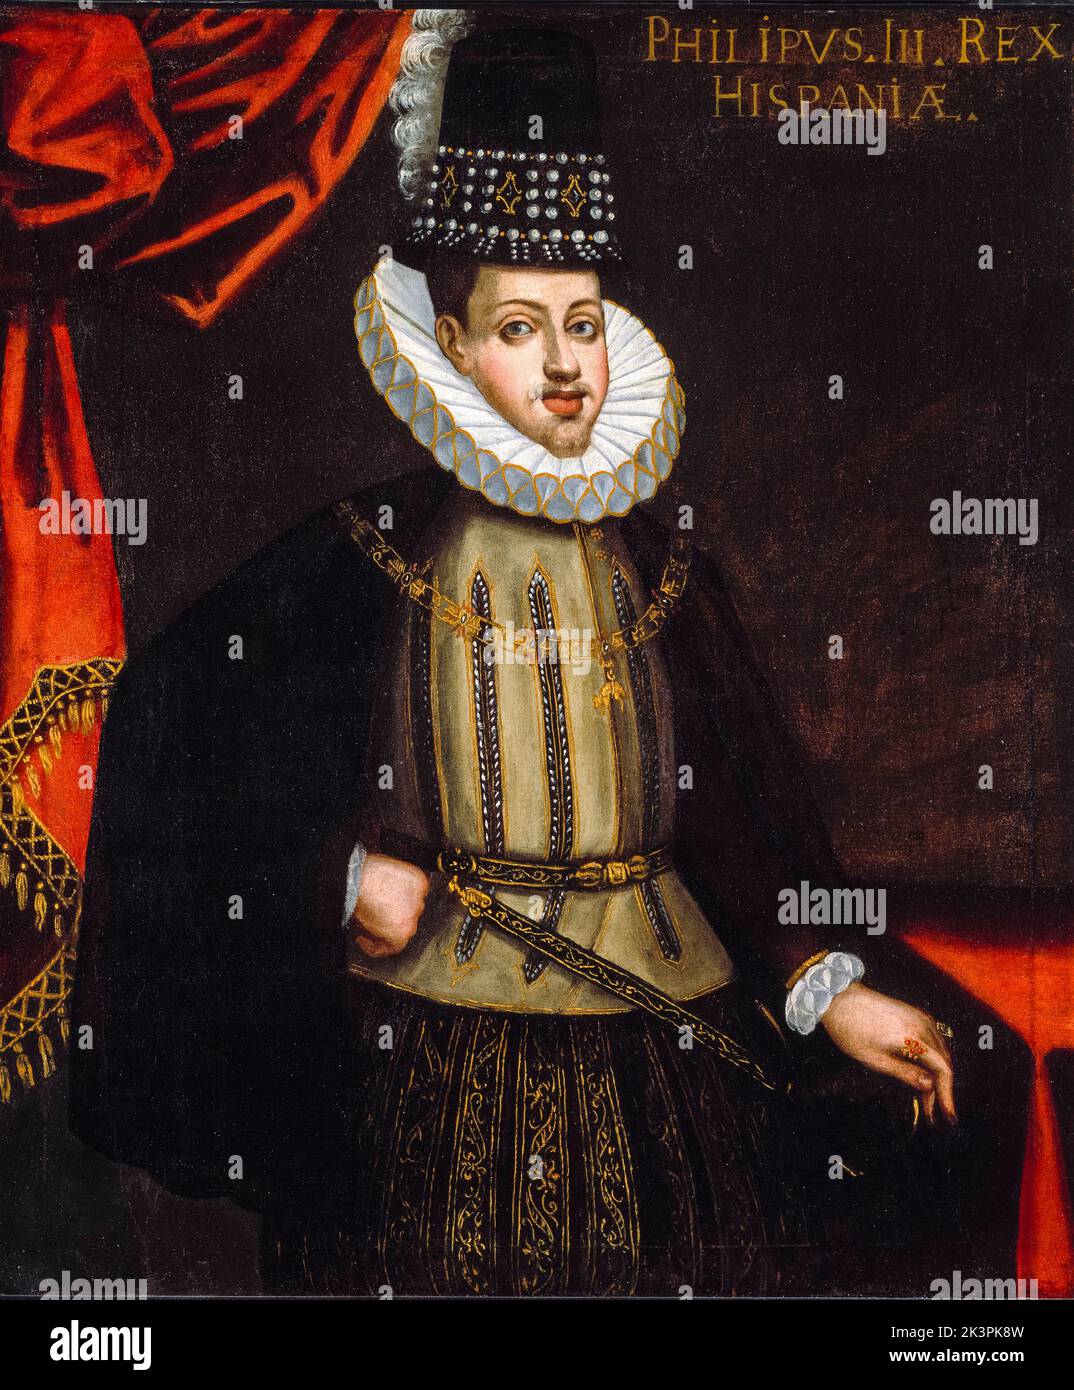 Philip III (1578-1621), King of Spain, (1598-1621), portrait painting in oil on canvas by an artist of the Spanish School, 1590-1600 Stock Photo